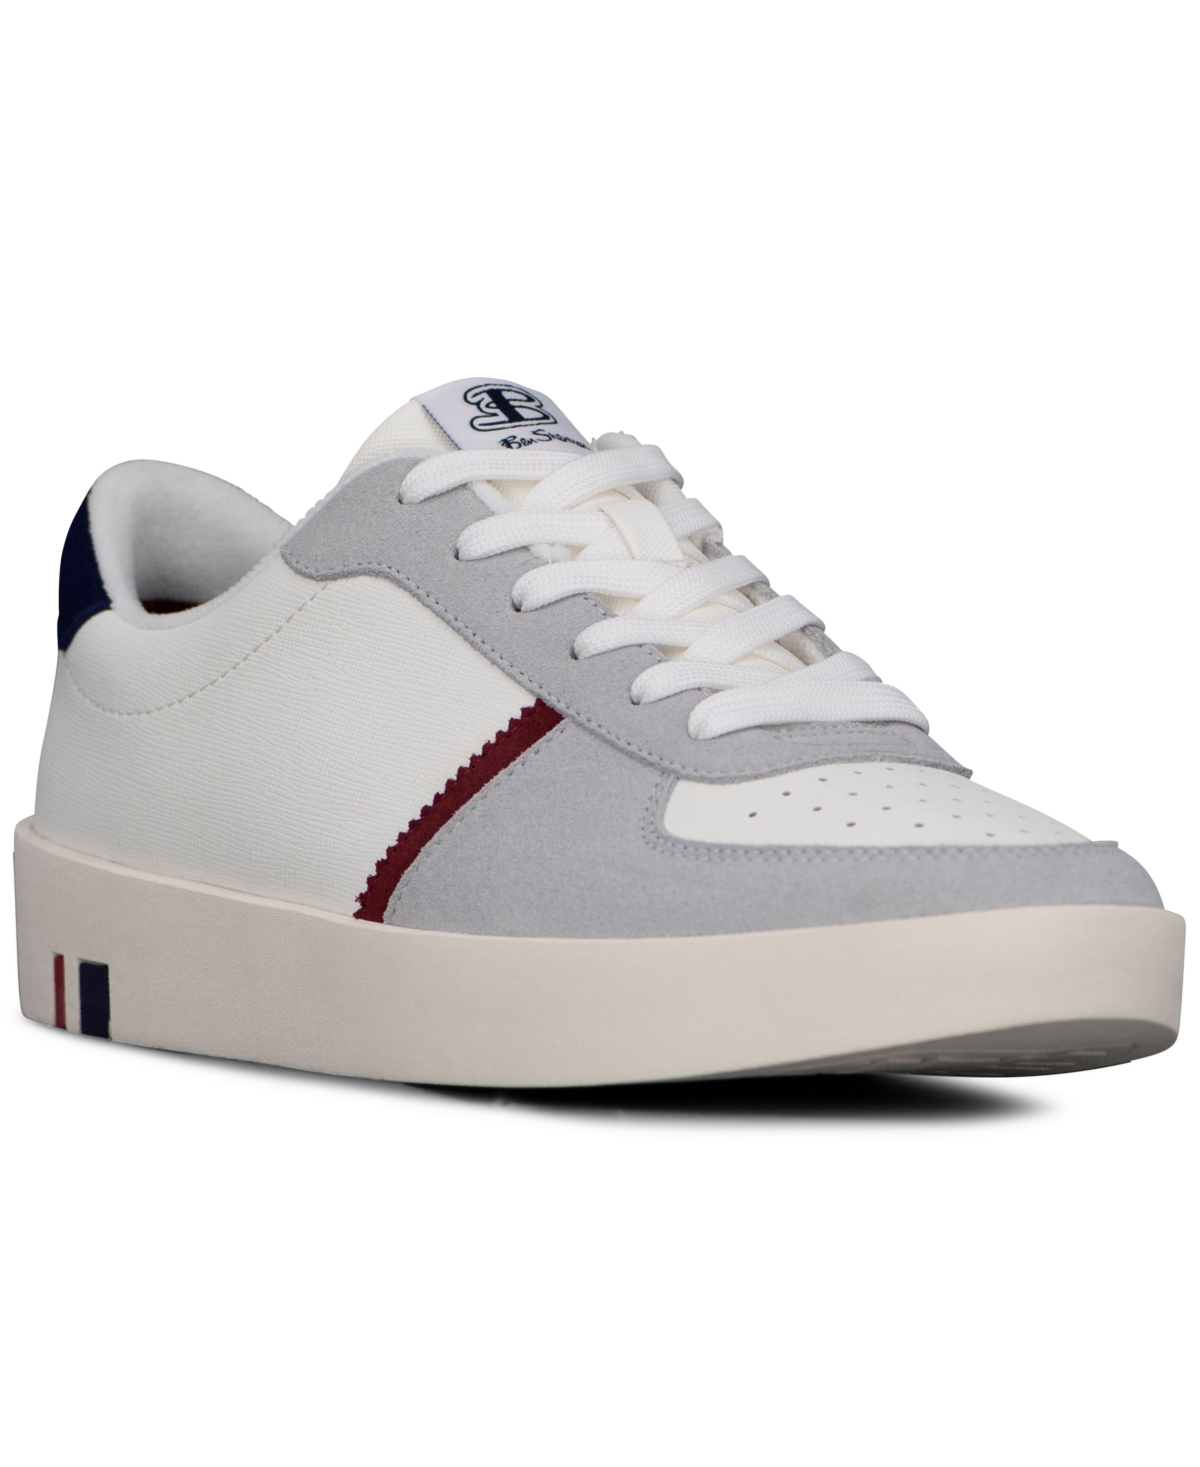 Ben Sherman Men's Richmond Low Casual Sneakers From Finish Line In White,navy